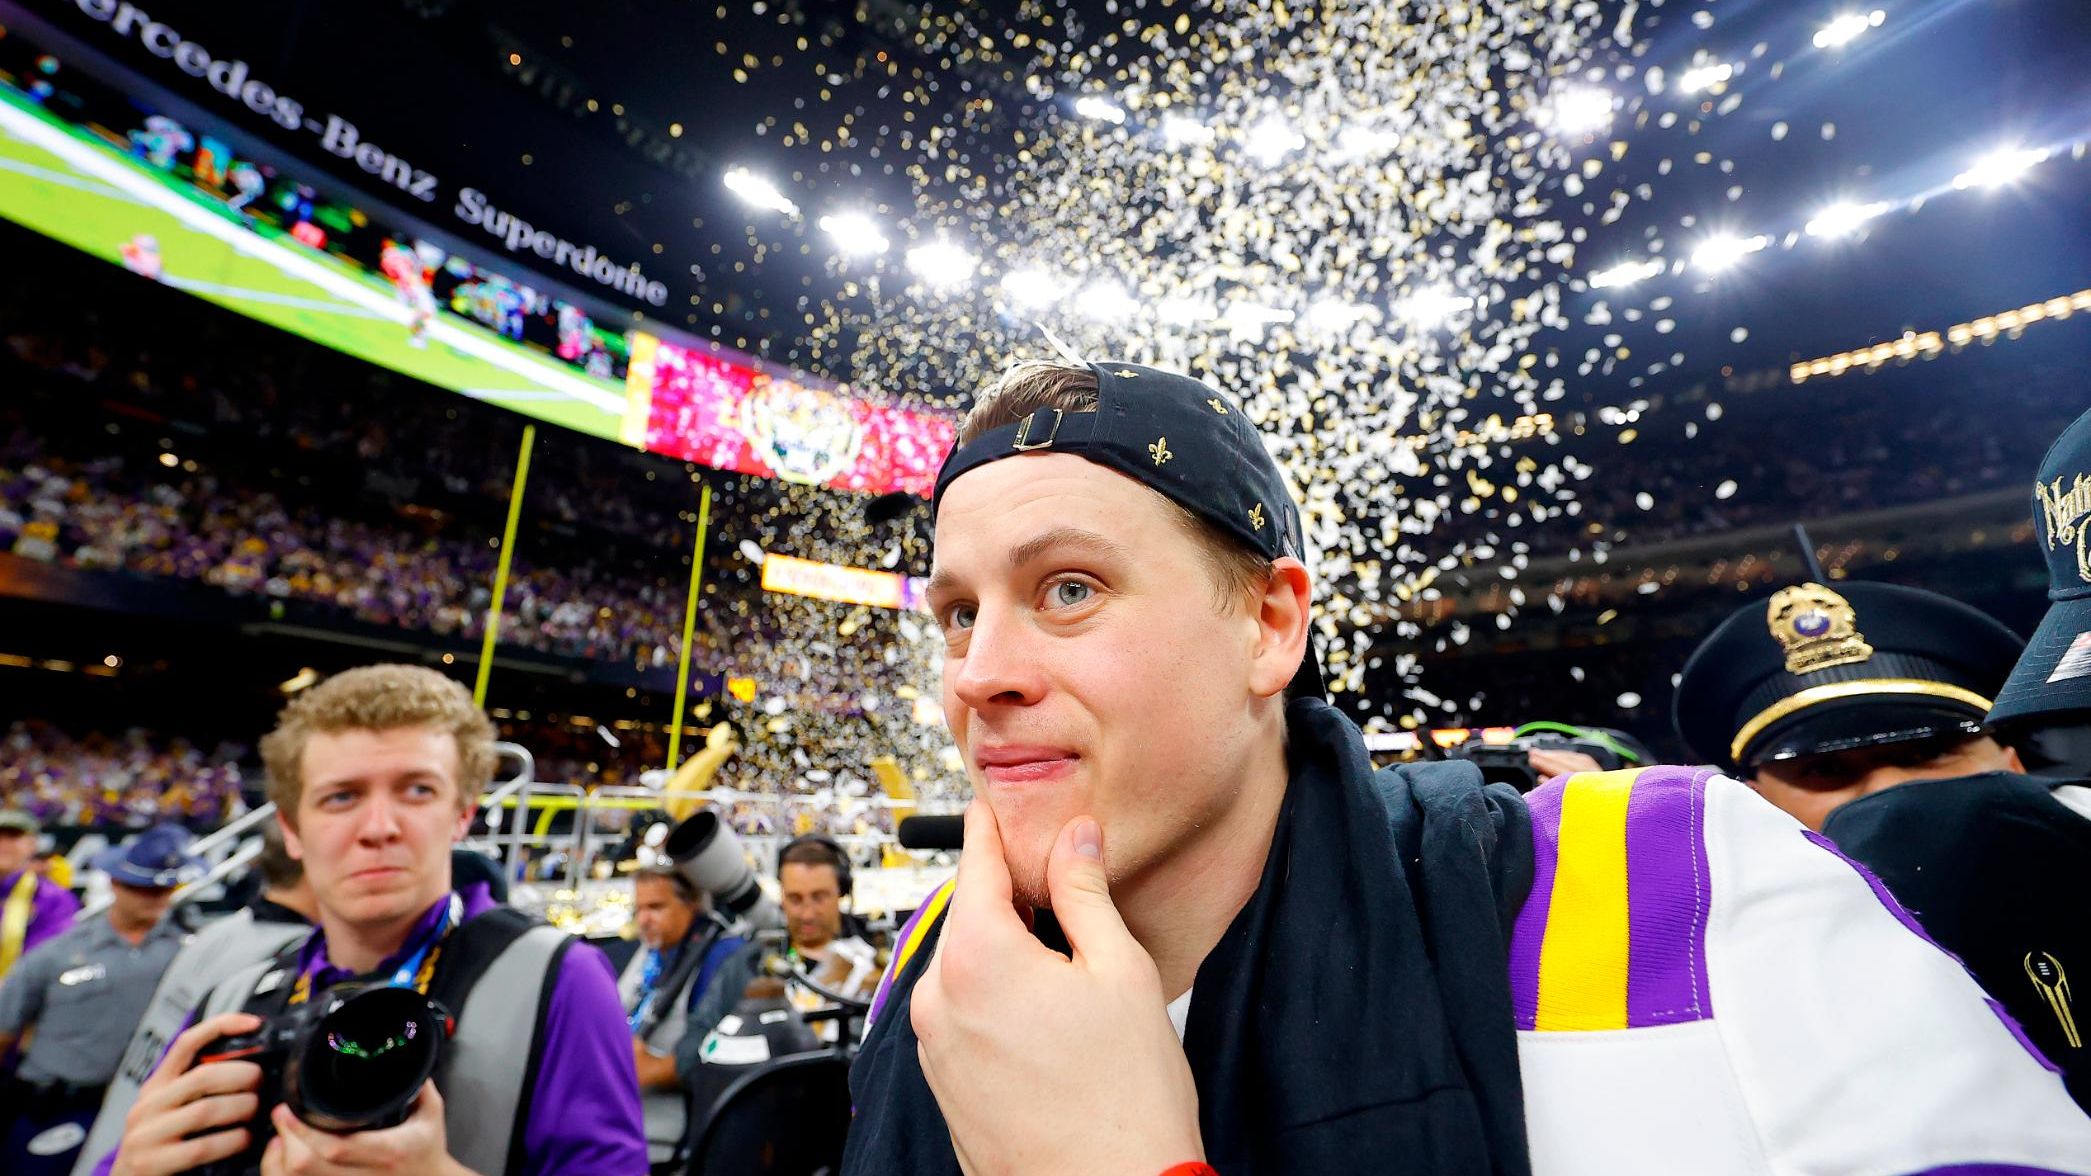 Joe Burrow celebrates after winning the national championship in January. He's expected to be the draft's top pick.